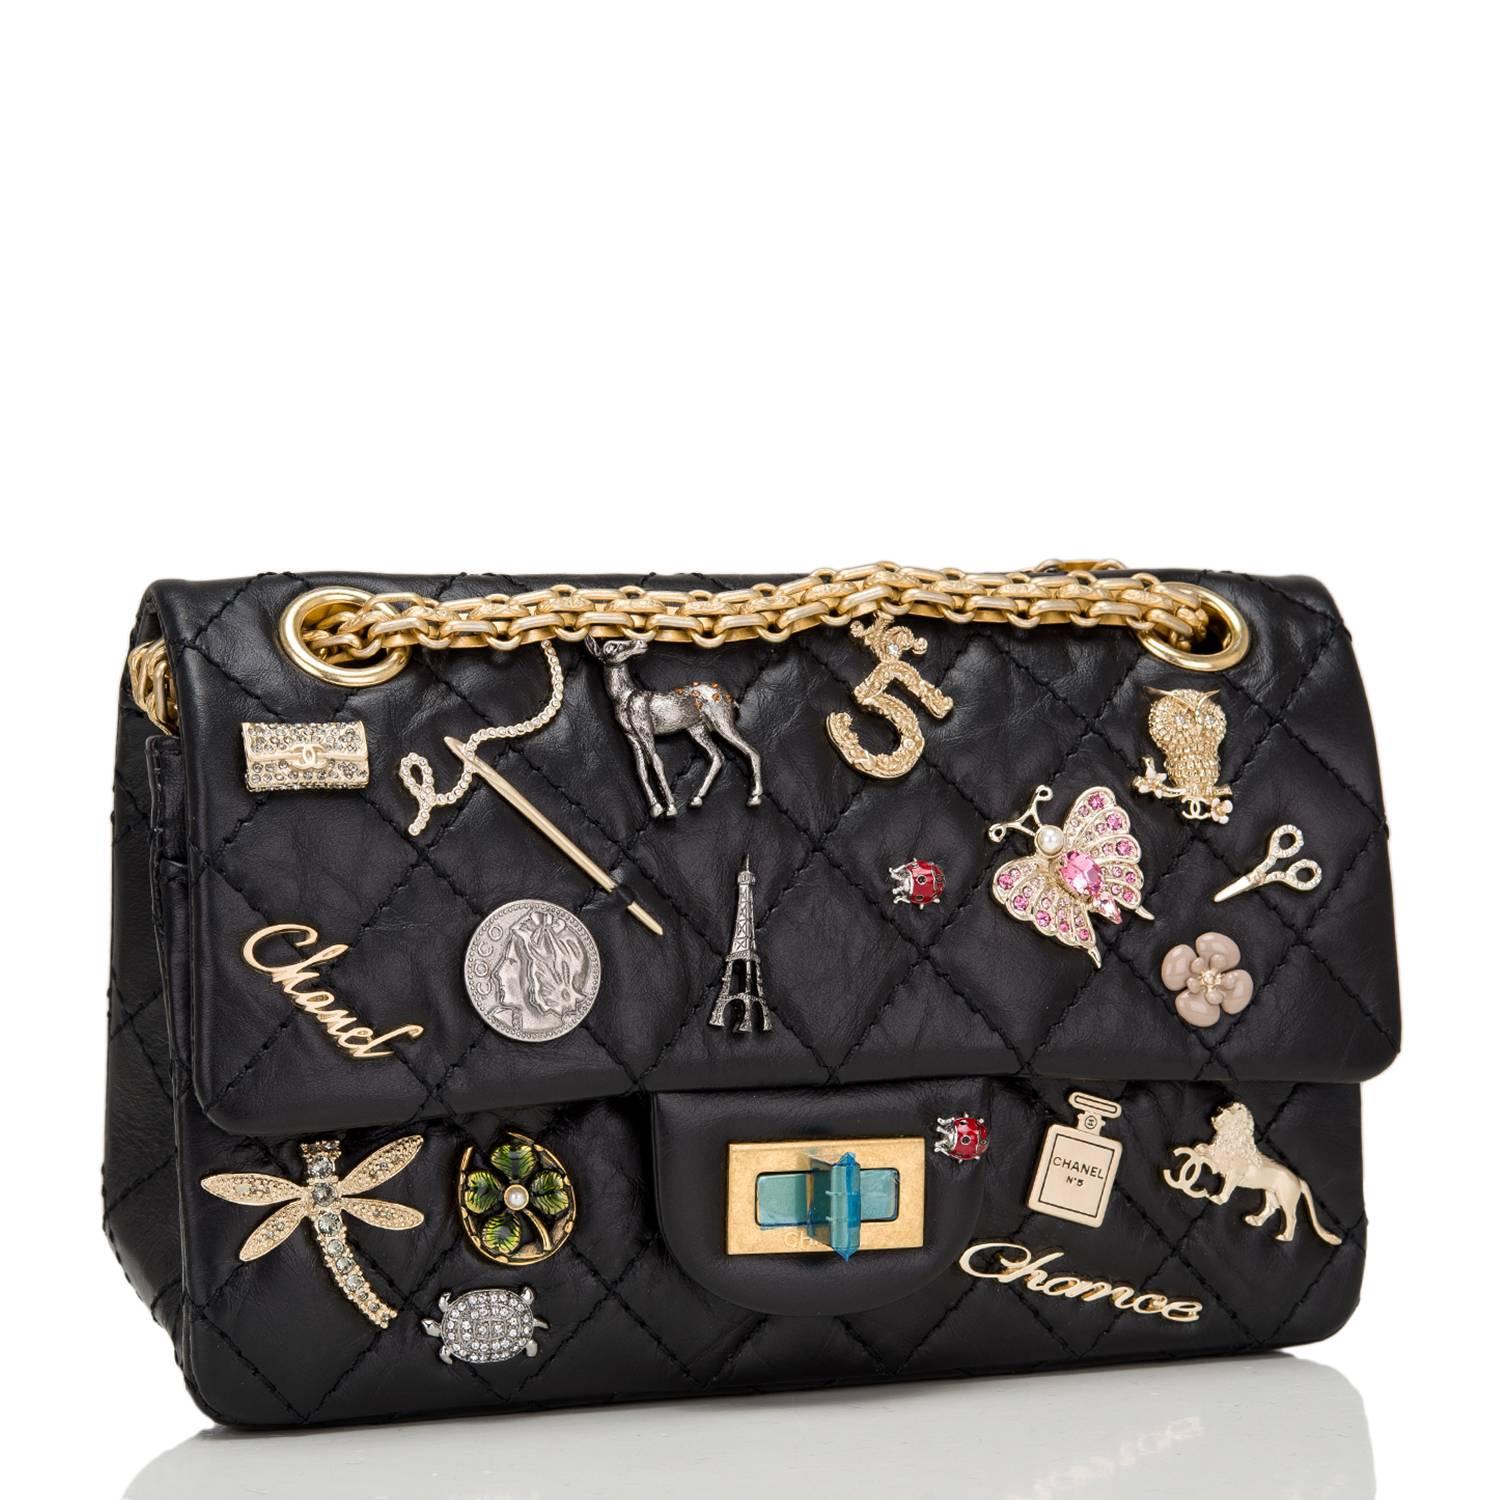 Chanel Lucky Charm Reissue 2.55 bag in black aged calfskin leather with gold tone hardware in size 224.

This embellished bag features 19 iconic Chanel charms, front flap with Mademoiselle turnlock closure, a half moon back pocket, and adjustable